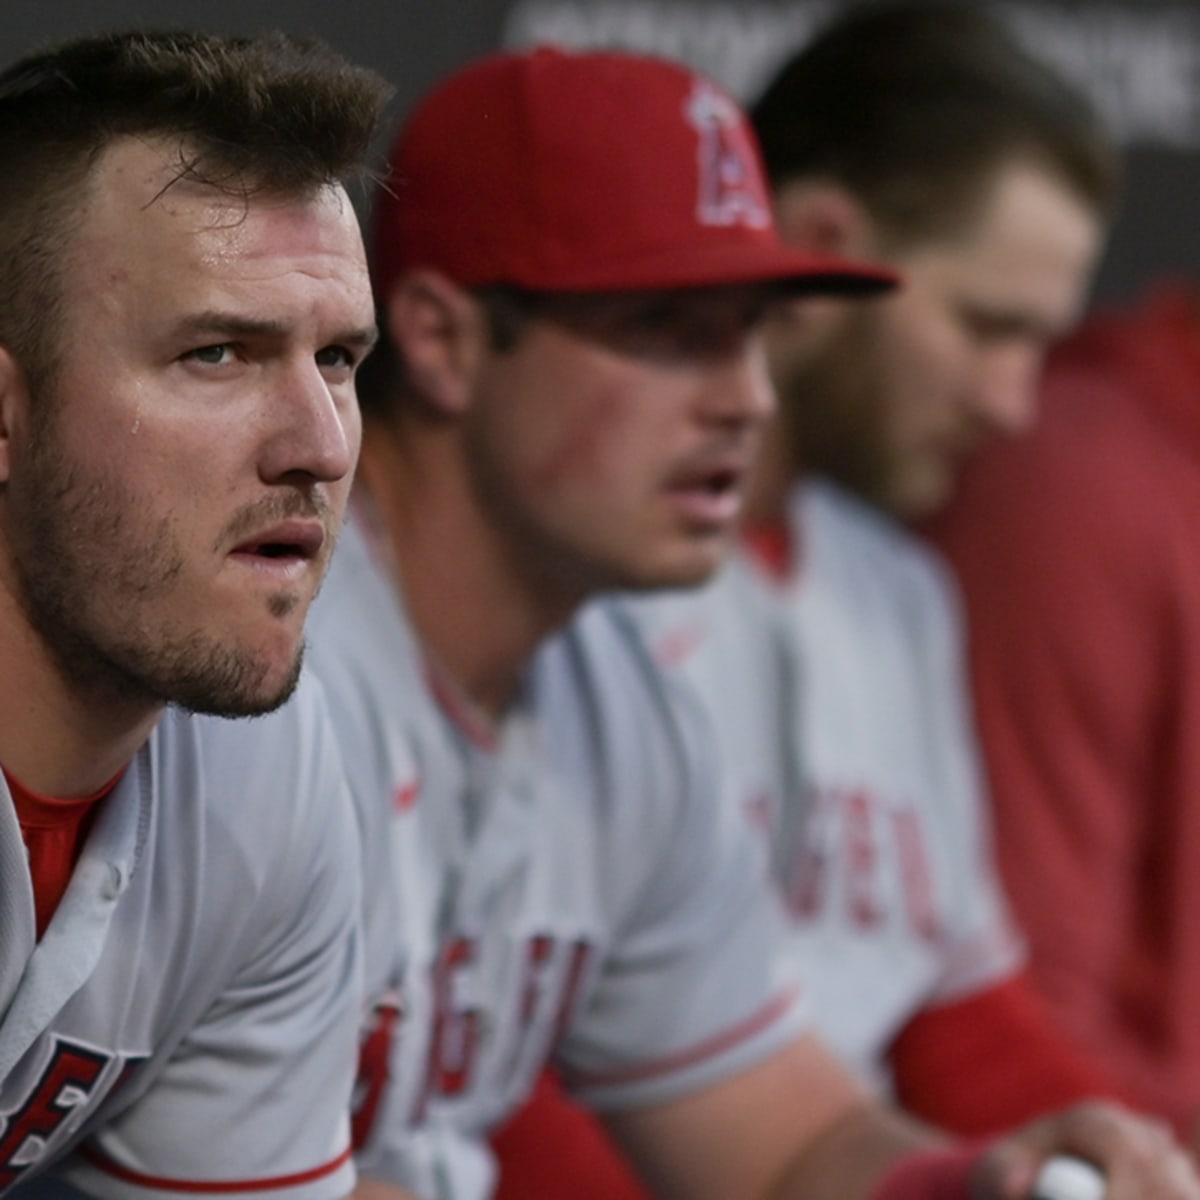 Mike Trout's throwing arm used to be a weakness, but is now a strength 